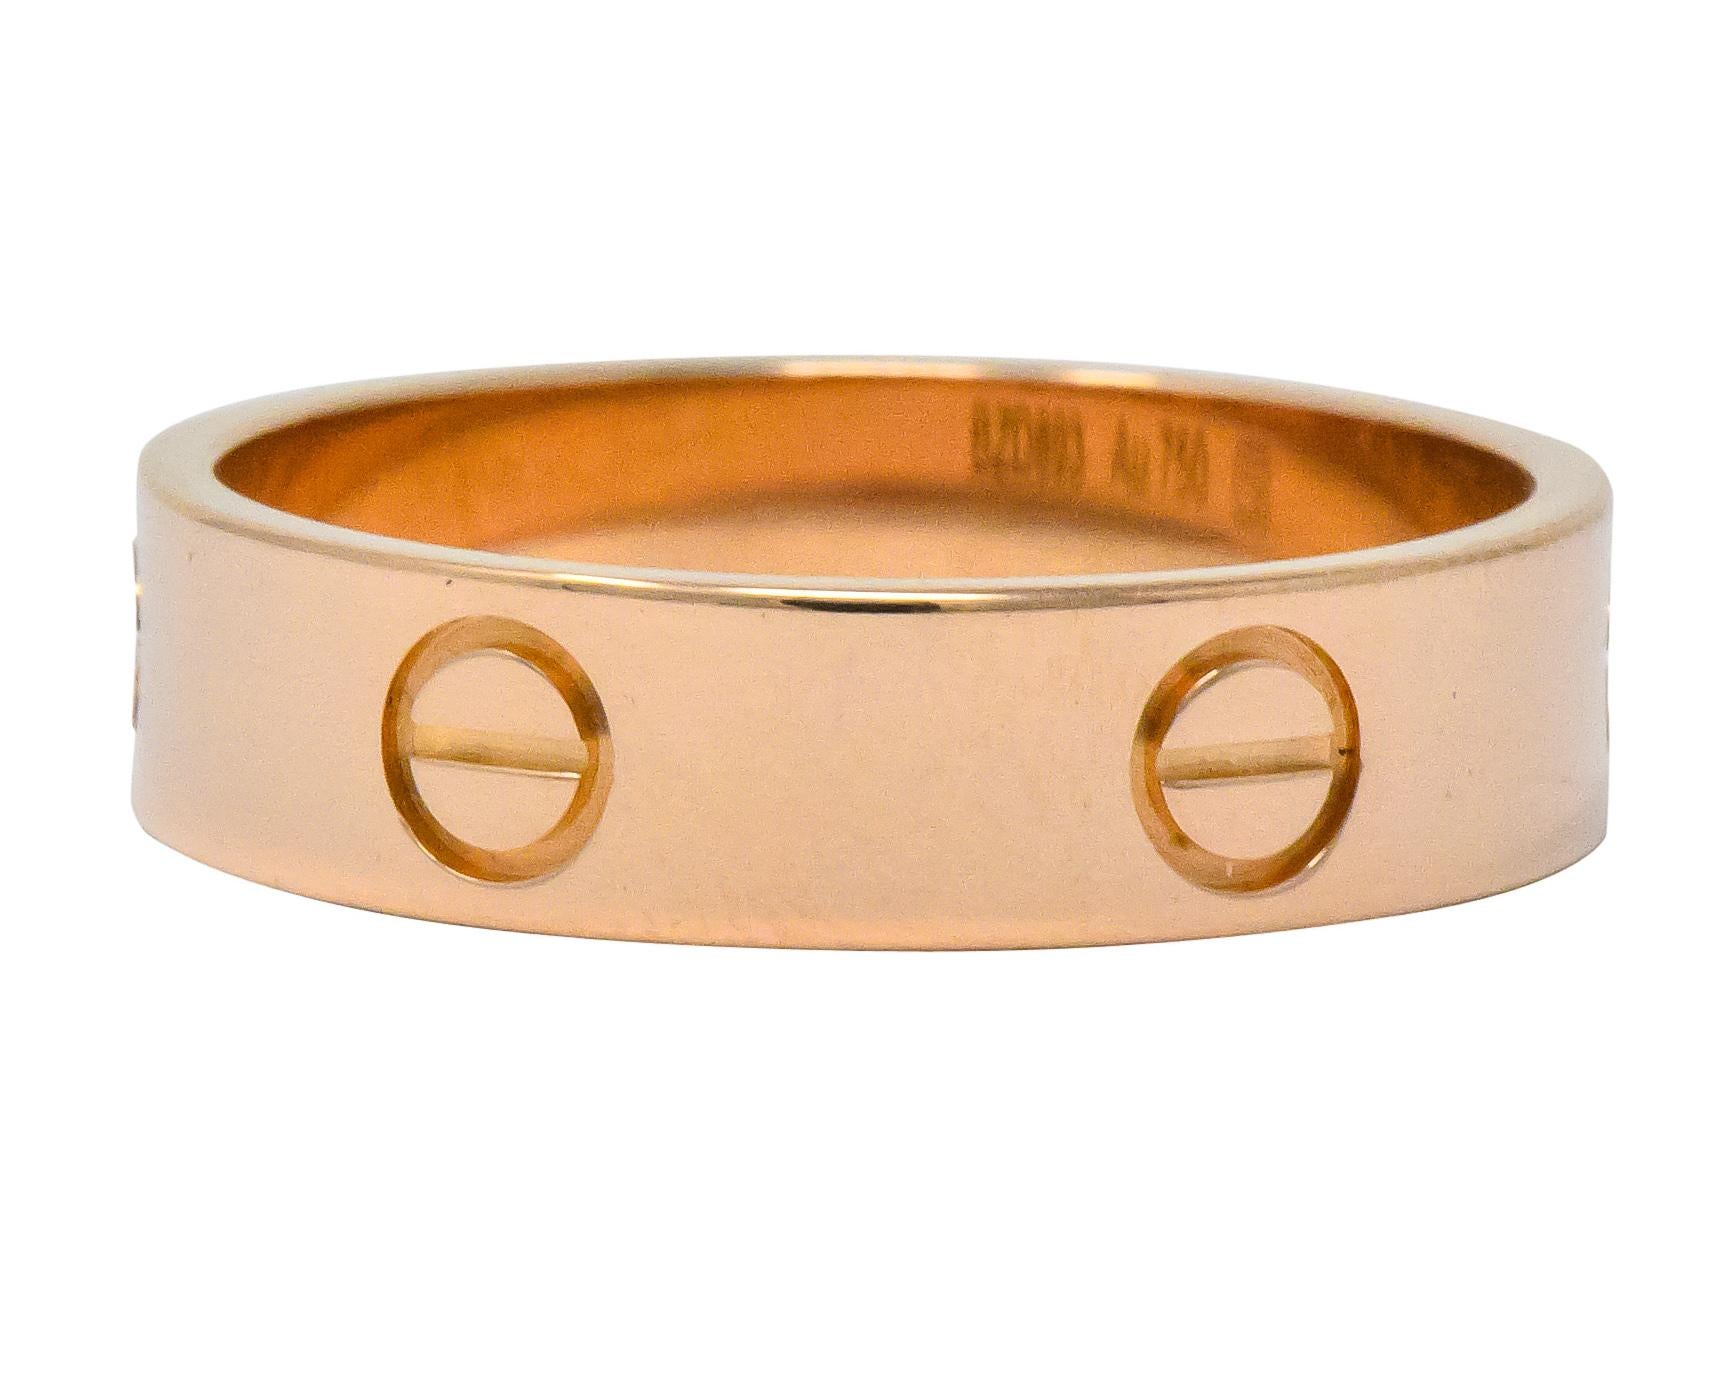 Rose gold band ring featuring screw head motif

From Cartier's Love collection

Fully signed Cartier and numbered

Stamped 750 for 18 karat gold and 62

Ring Size: 10 & not sizable

Measures: 5.4 mm and sits 1.4 mm high

Total weight: 6.6